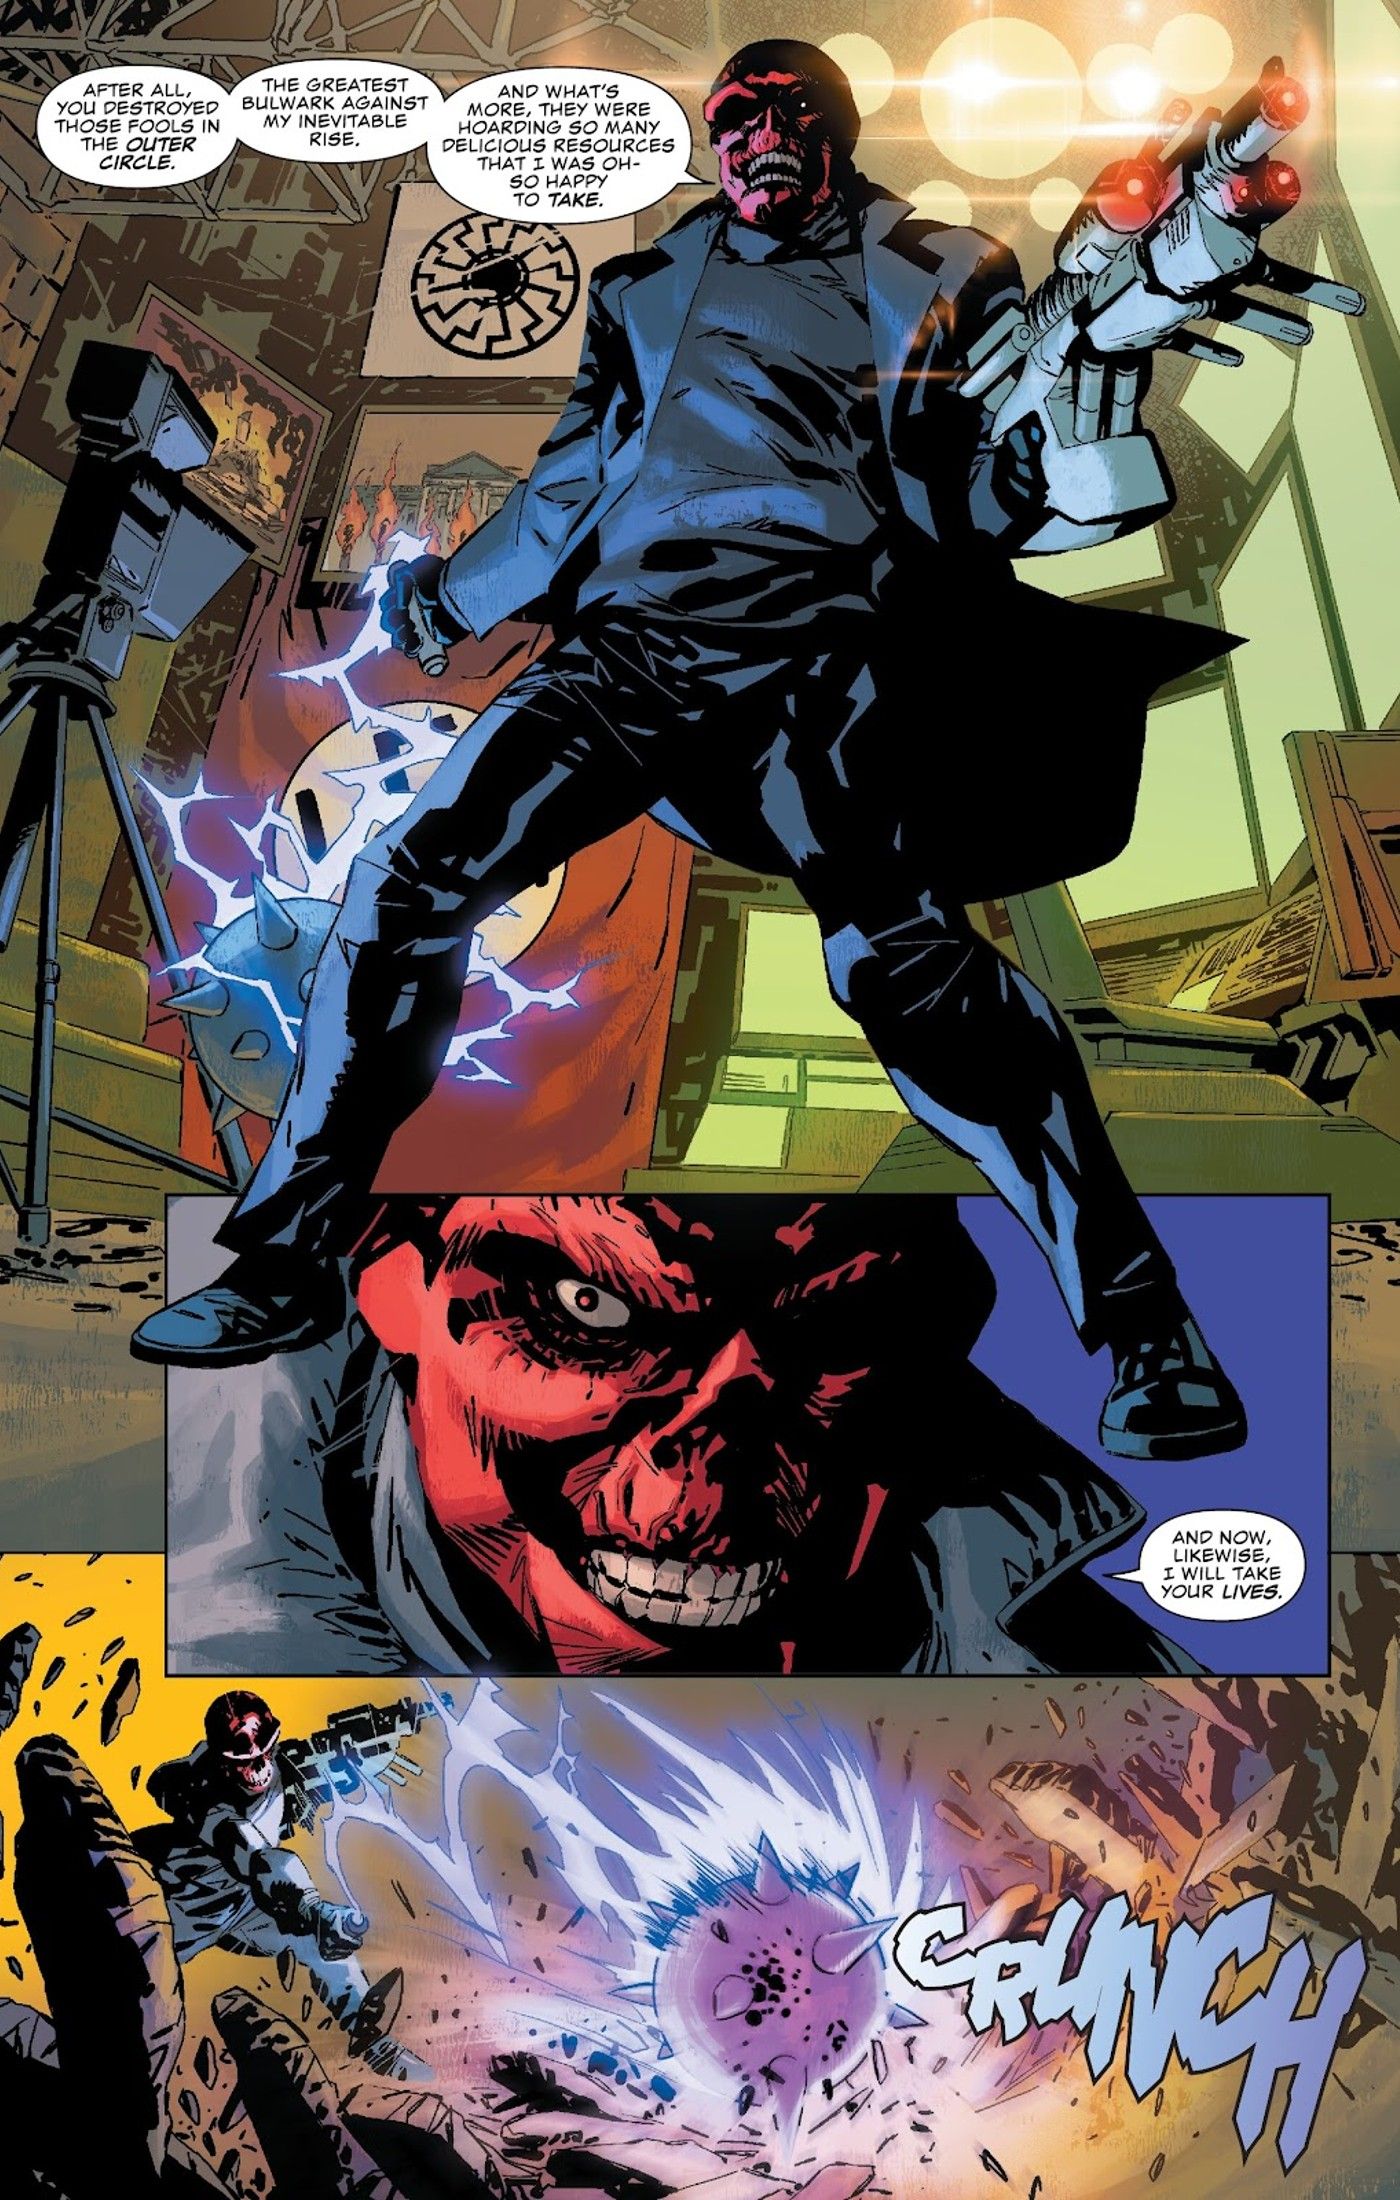 Red Skull fires at Bucky Barnes and the Thunderbolts-1